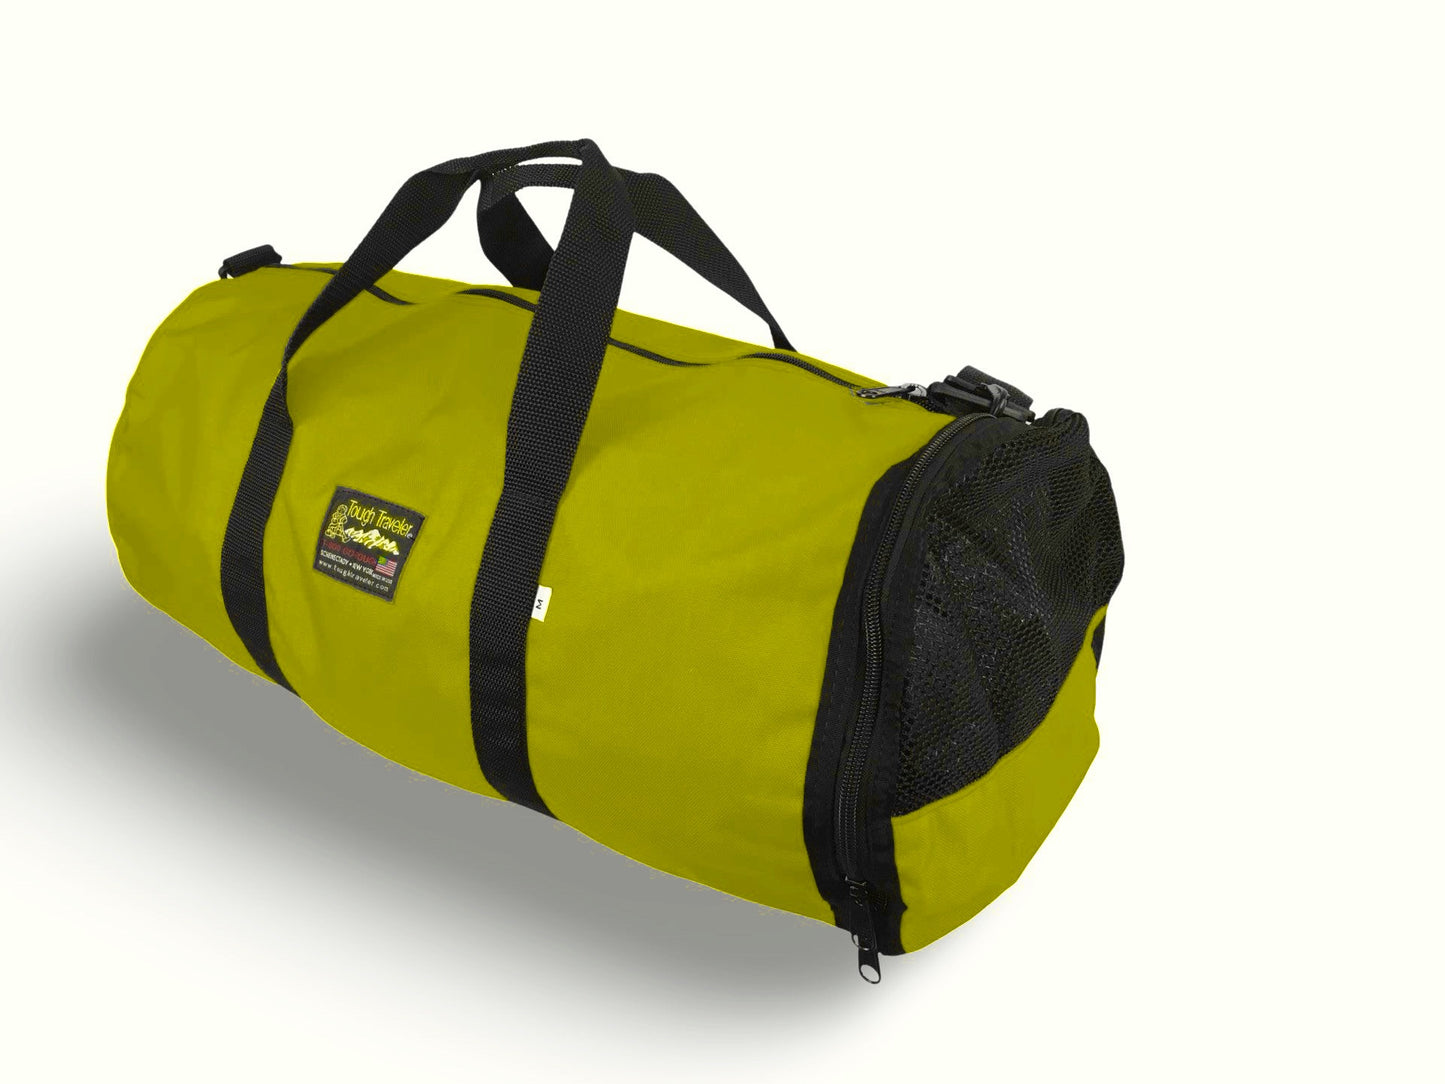 FITNESS DUFFEL M Duffel Bags, by Tough Traveler. Made in USA since 1970